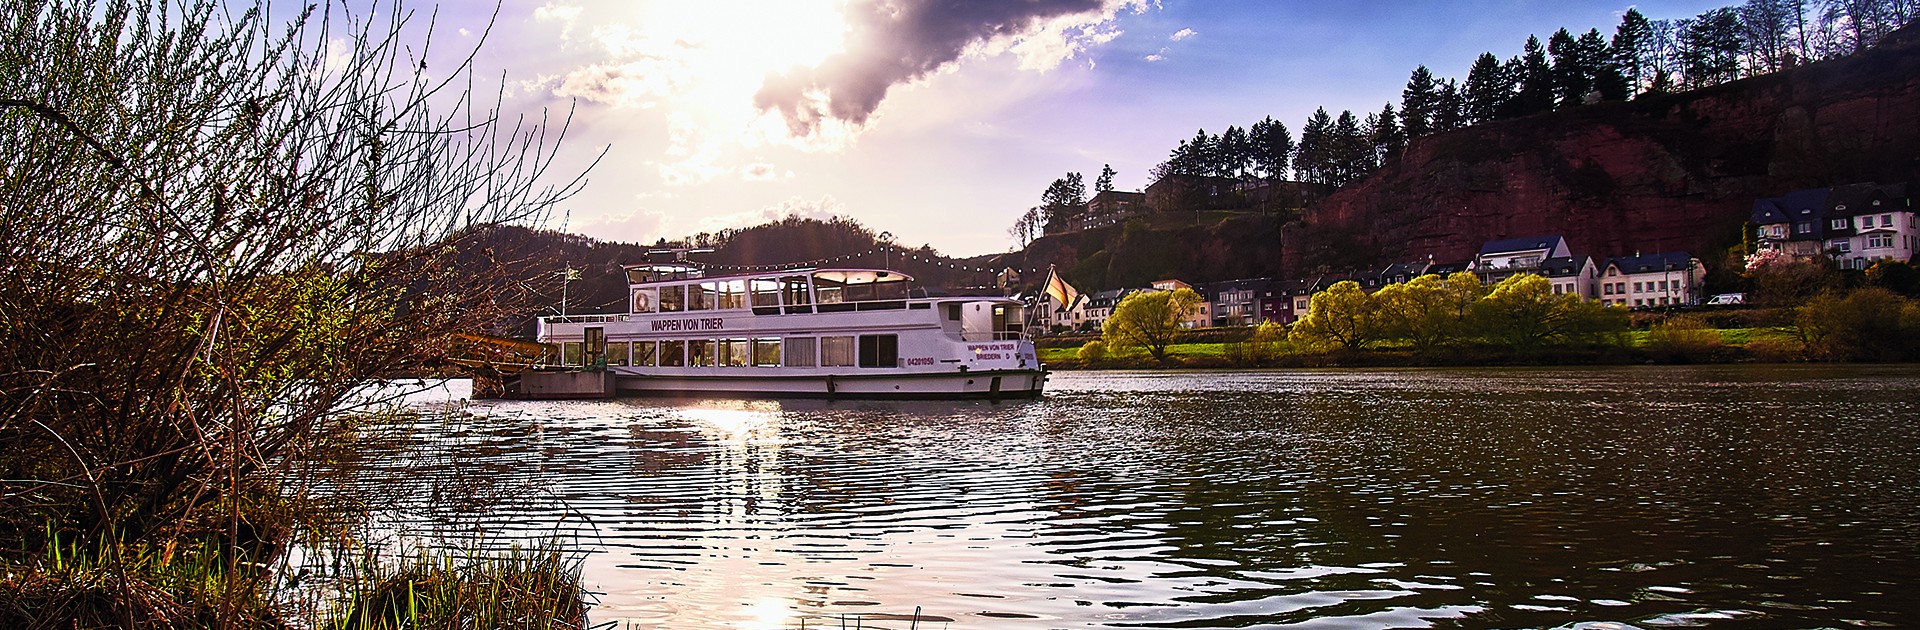 Ship at the Moselle Riverside - © Marcel Fuchs